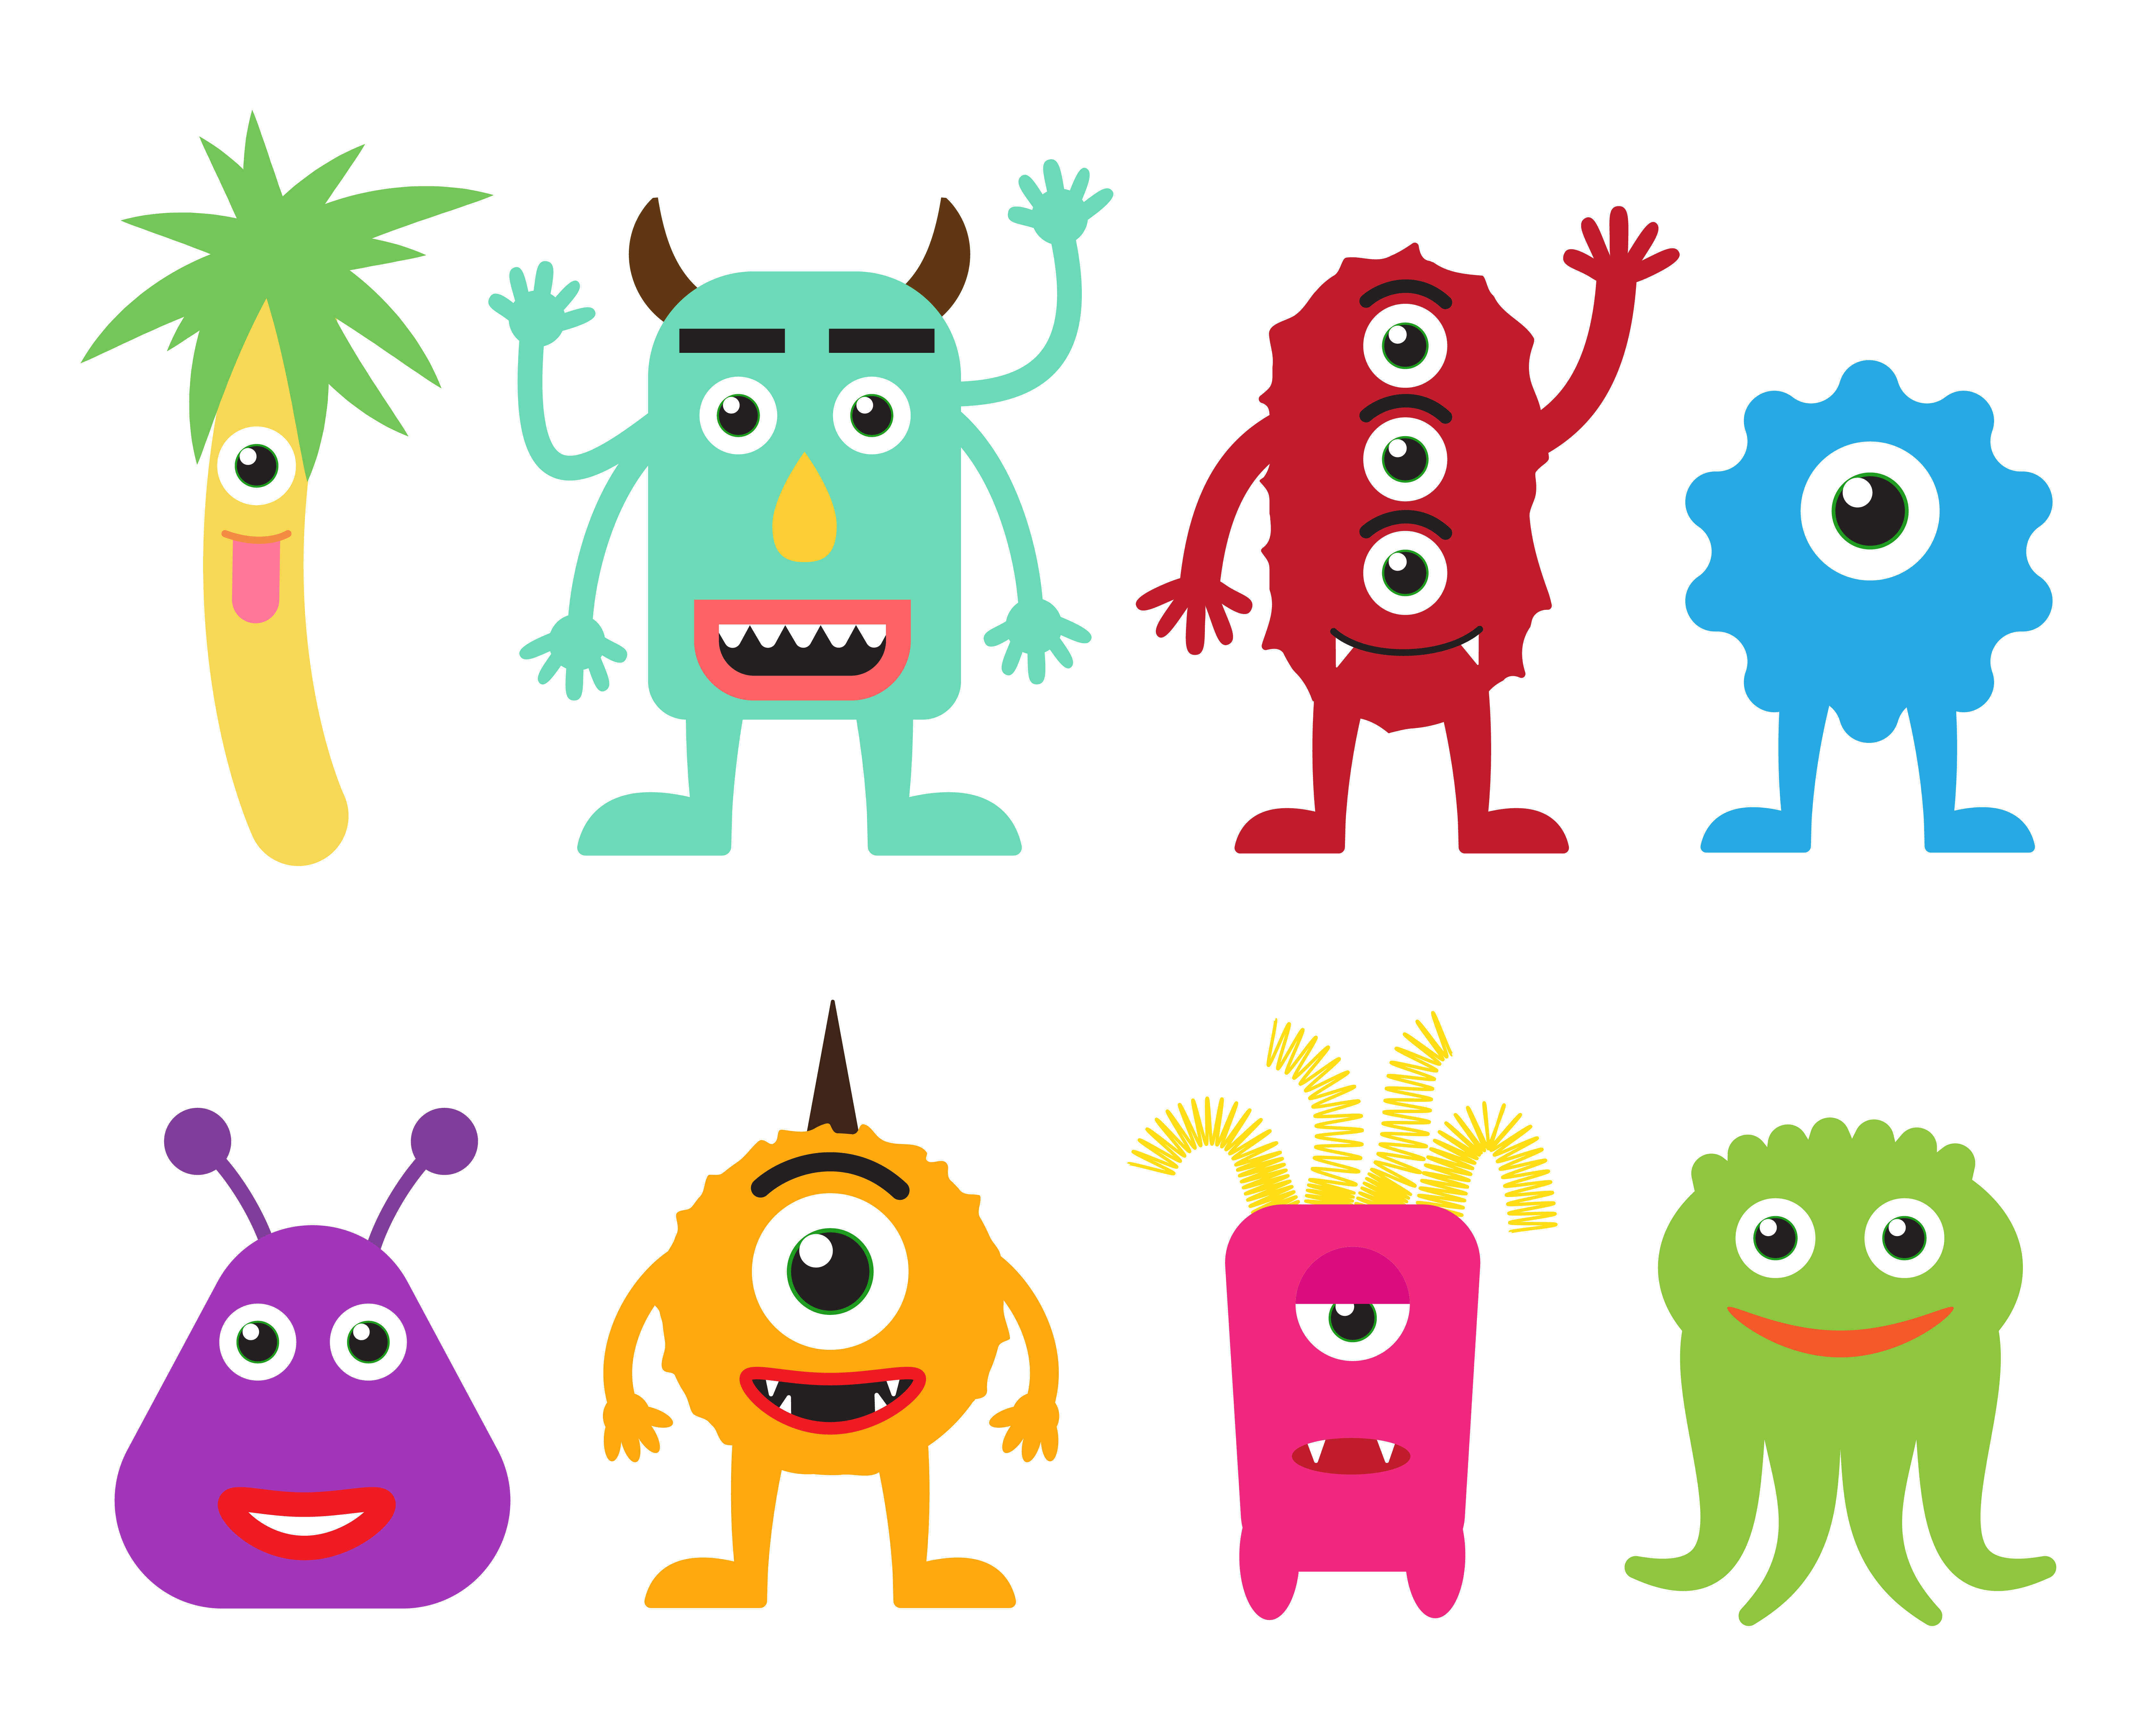 How To Draw Cute Cartoon Monsters From Simple Shapes - vrogue.co